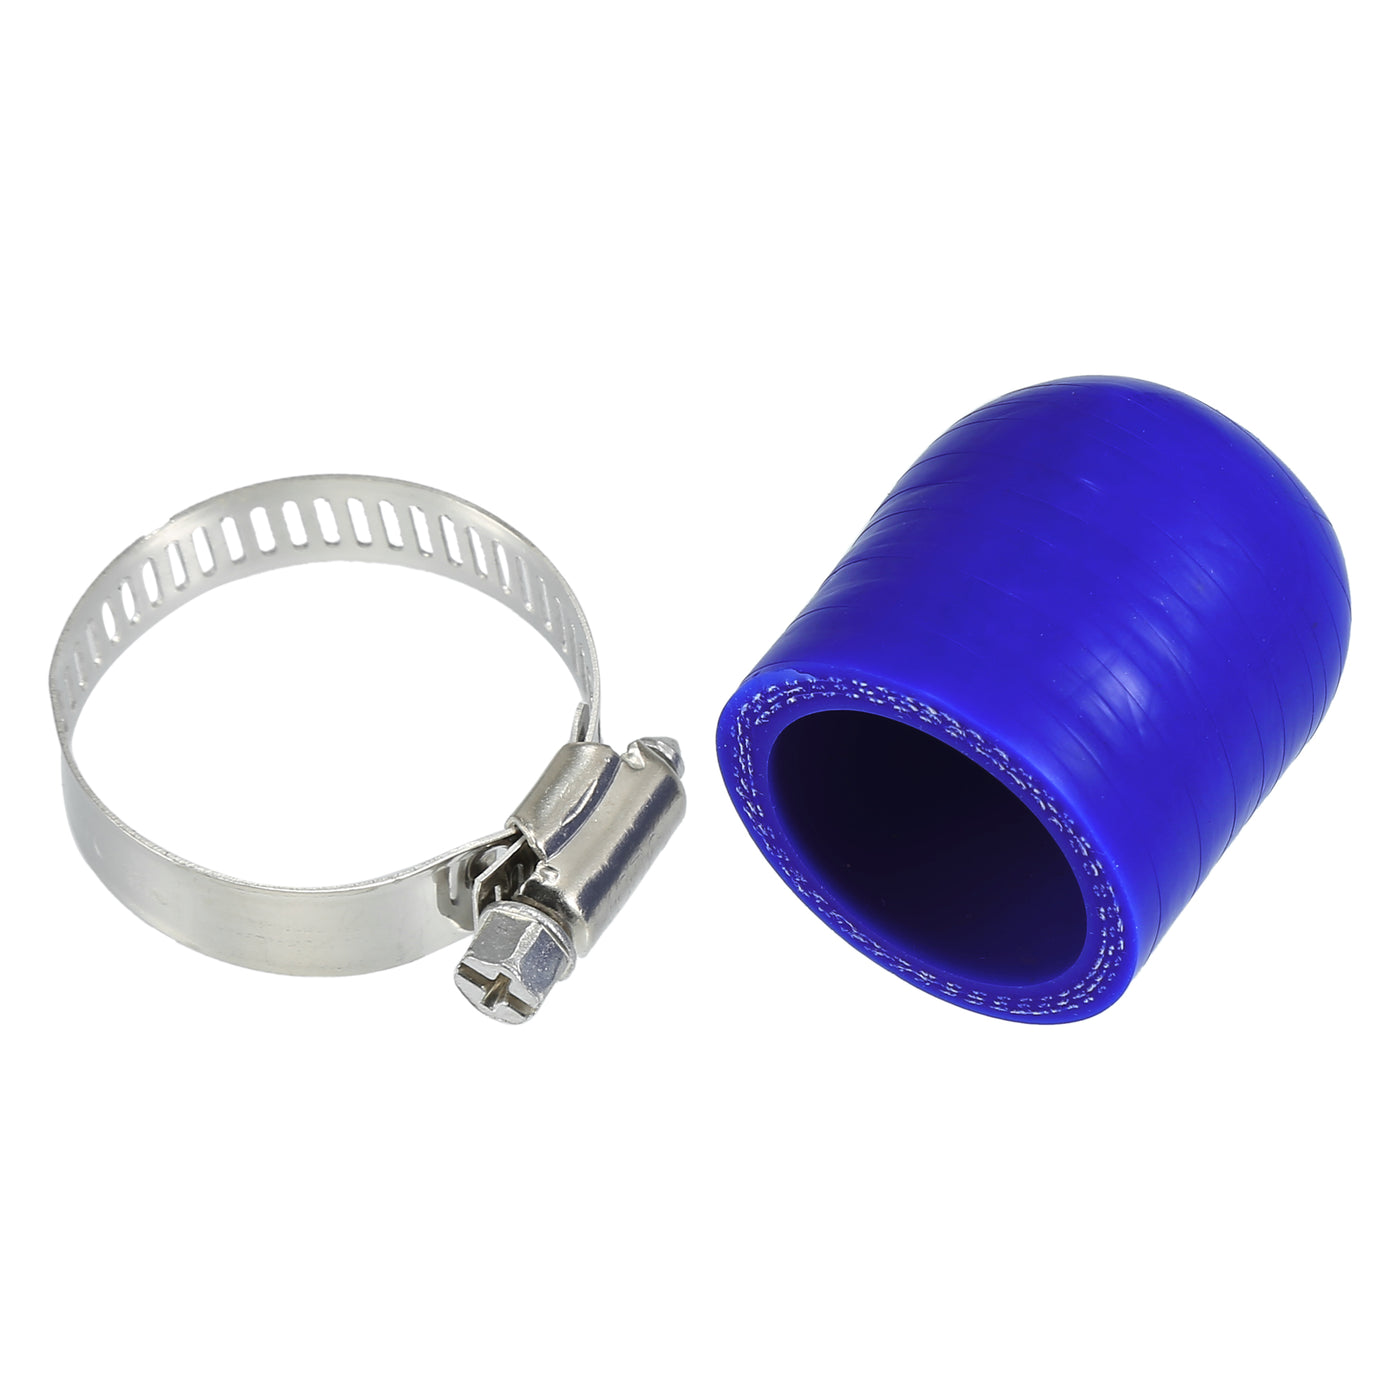 X AUTOHAUX 1 Set 30mm Length 30mm/1.18" ID Blue Car Silicone Rubber Hose End Cap with Clamps Silicone Reinforced Blanking Cap for Bypass Tube Universal